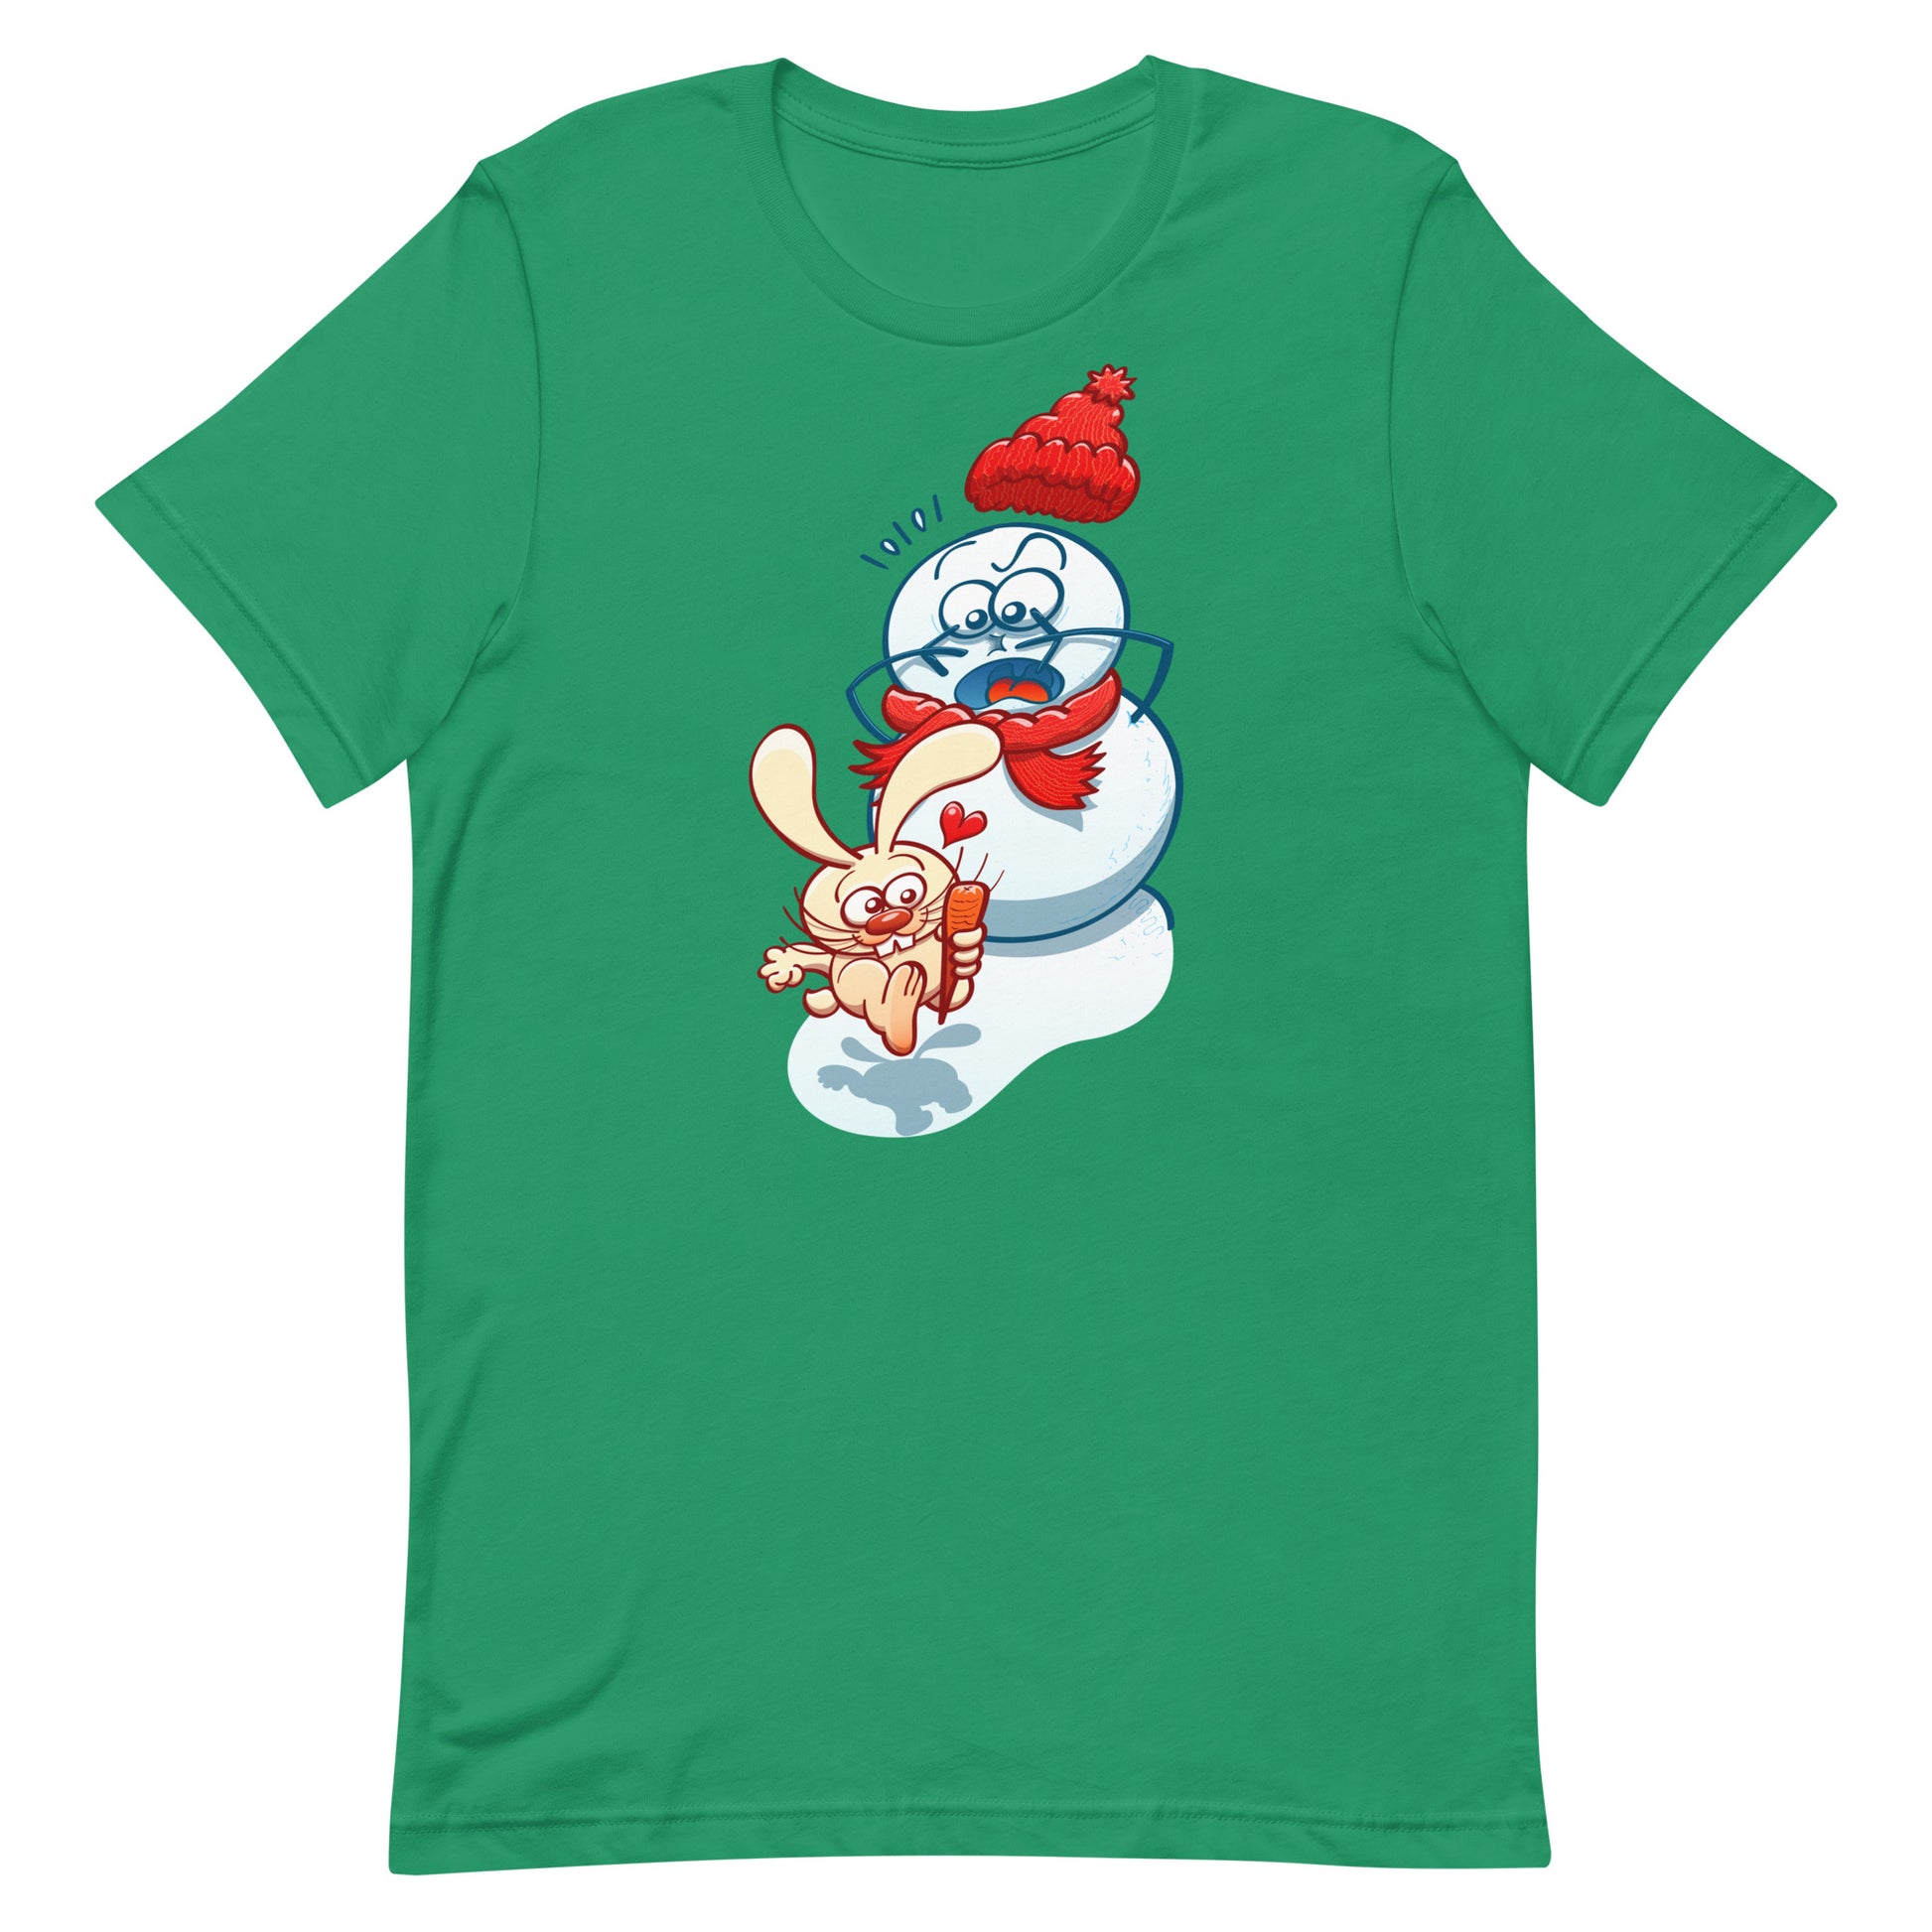 Snowman's Nose Heist: A Christmas Love Tale - Unisex t-shirt. Kelly green. Front view